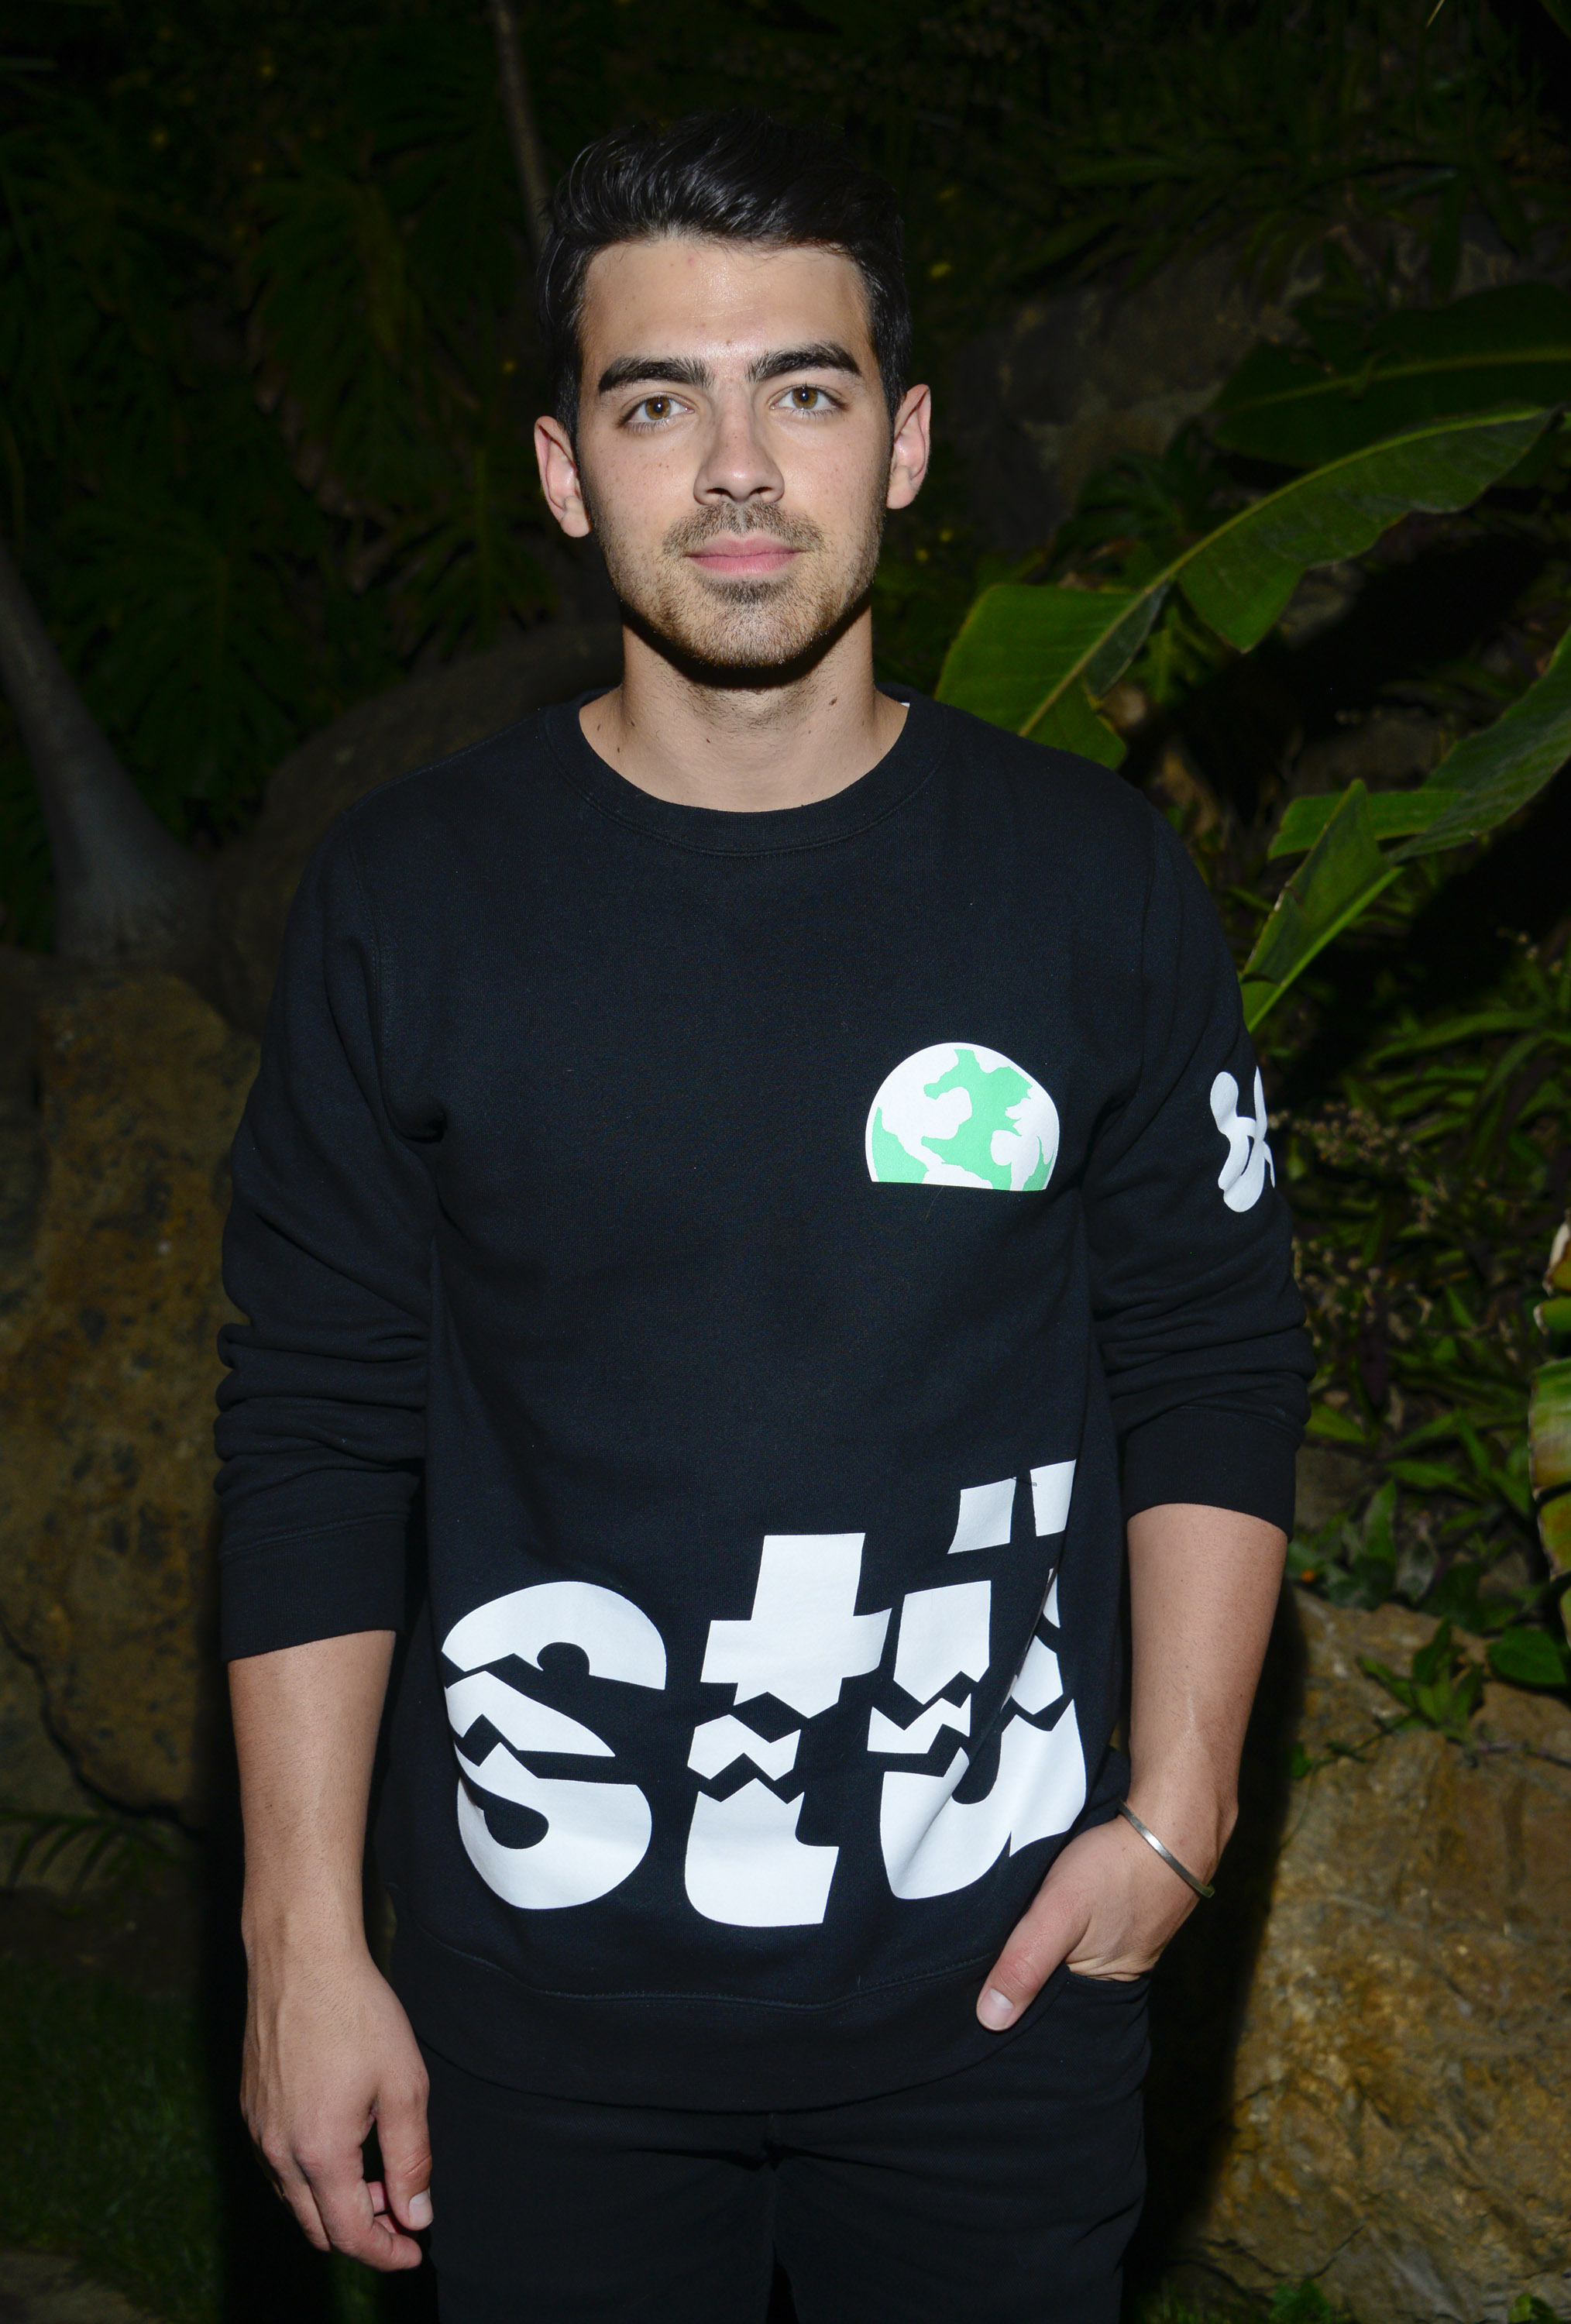 BEVERLY HILLS, CA - JUNE 09:  Singer Joe Jonas attends the Tequila Herradura Ultra Launch Party At The Bootsy Bellows Pop-Up on June 9, 2015 in Beverly Hills, California.  (Photo by Michael Bezjian/Getty Images for Tequila Herradura)